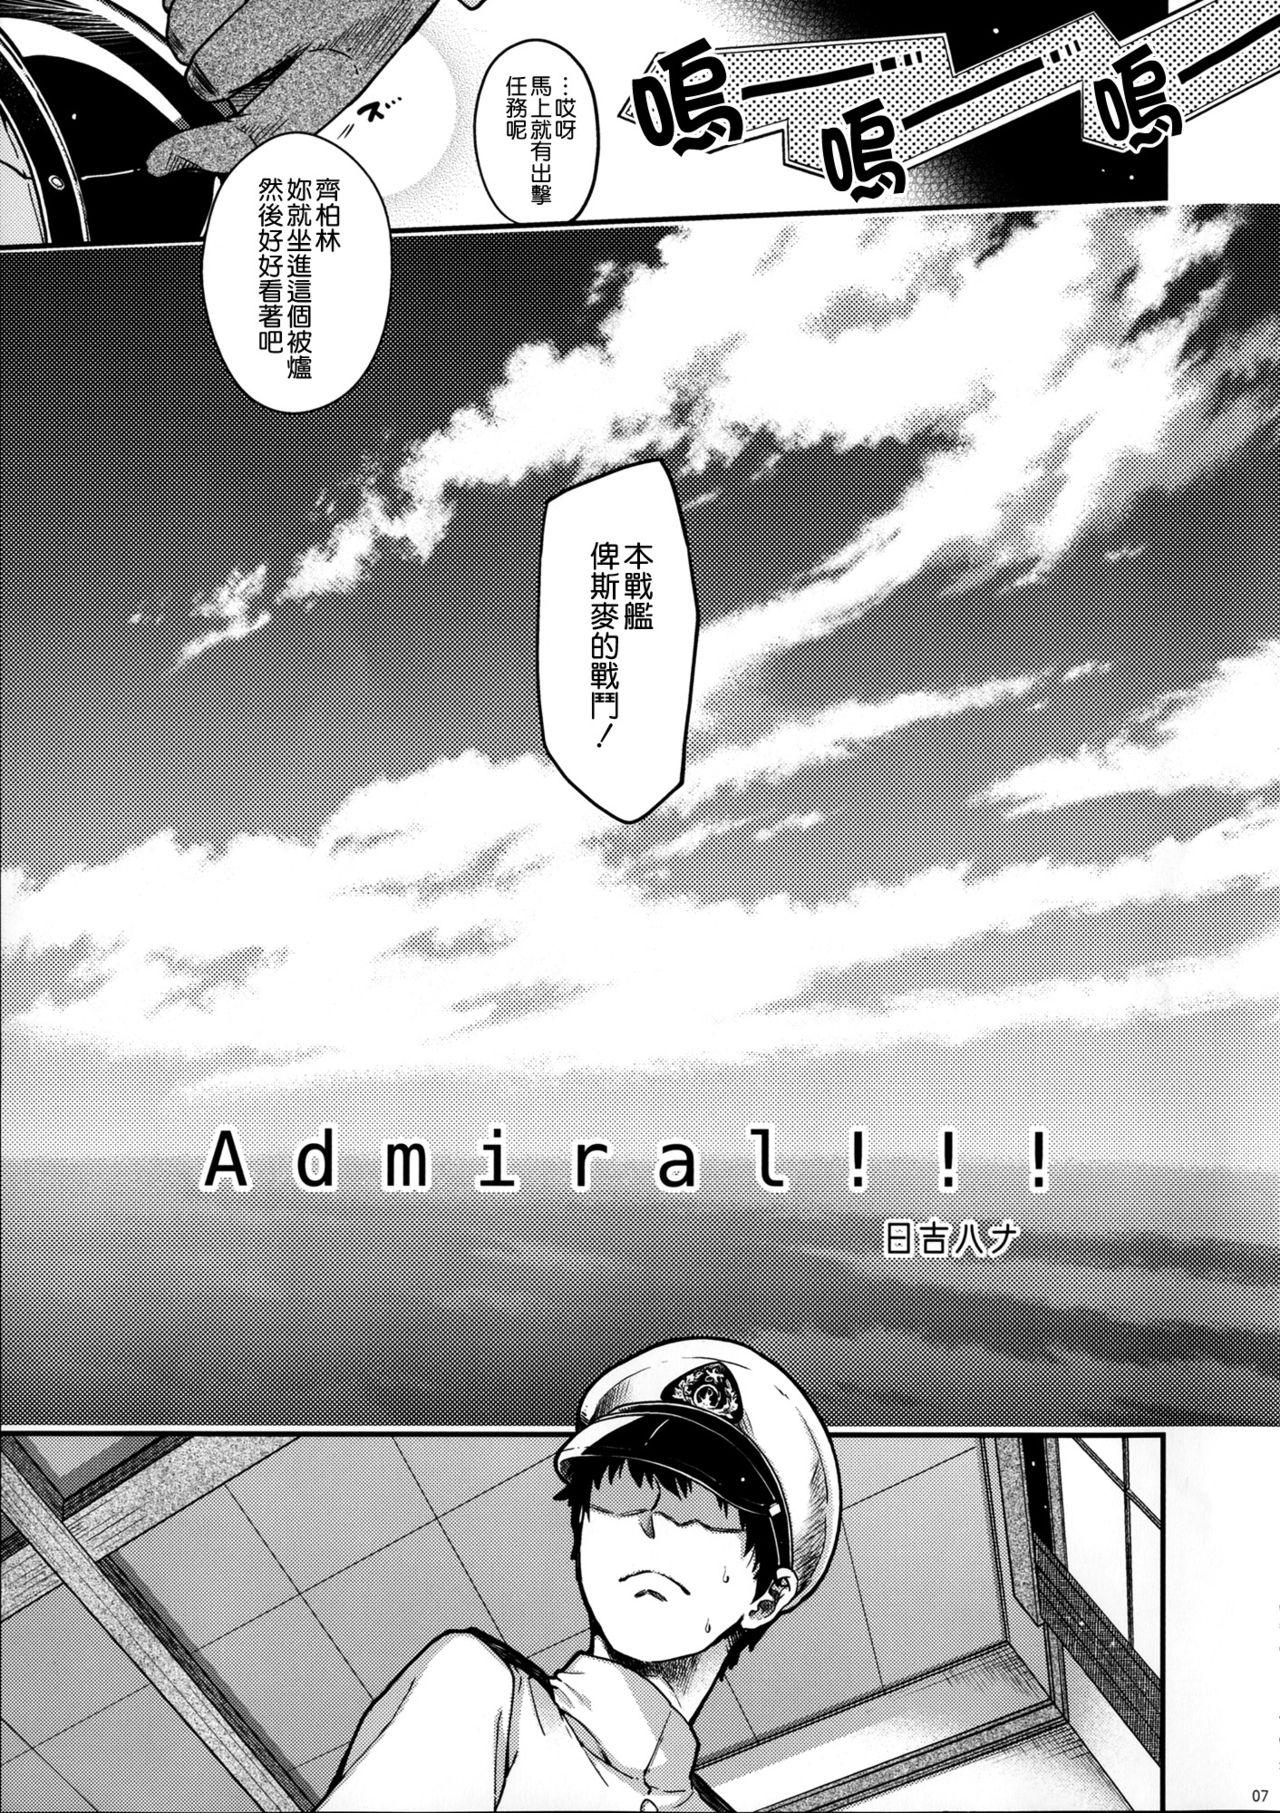 Full Movie Admiral!!! + Omake Paper - Kantai collection Masterbate - Page 7